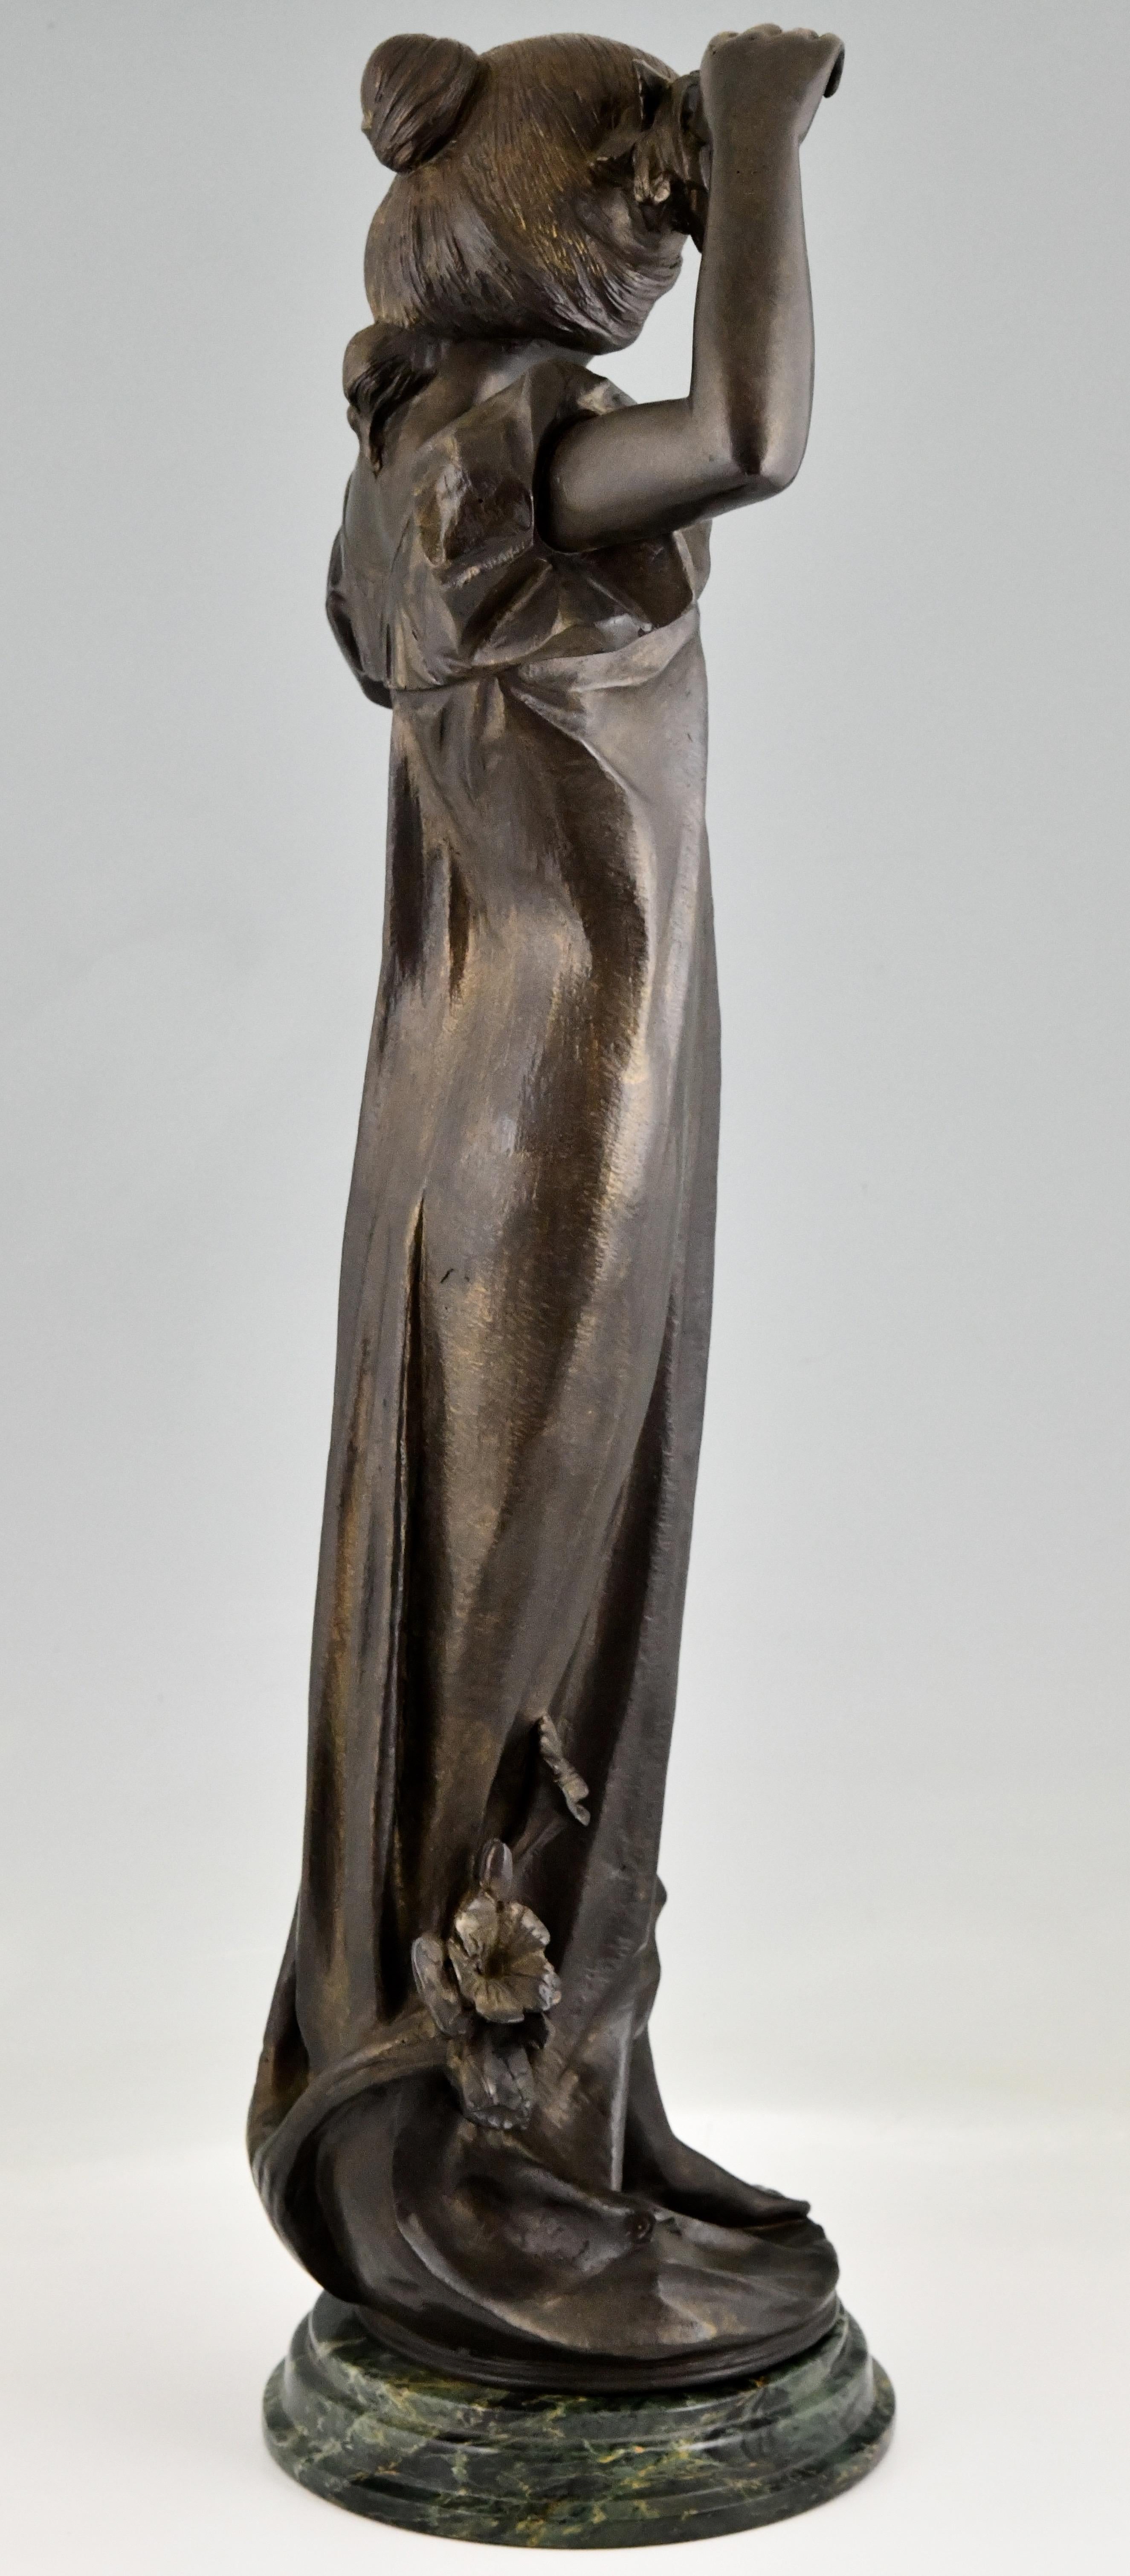 Early 20th Century Art Nouveau bronze sculpture lady with poppies signed by Adolpho Cipriani